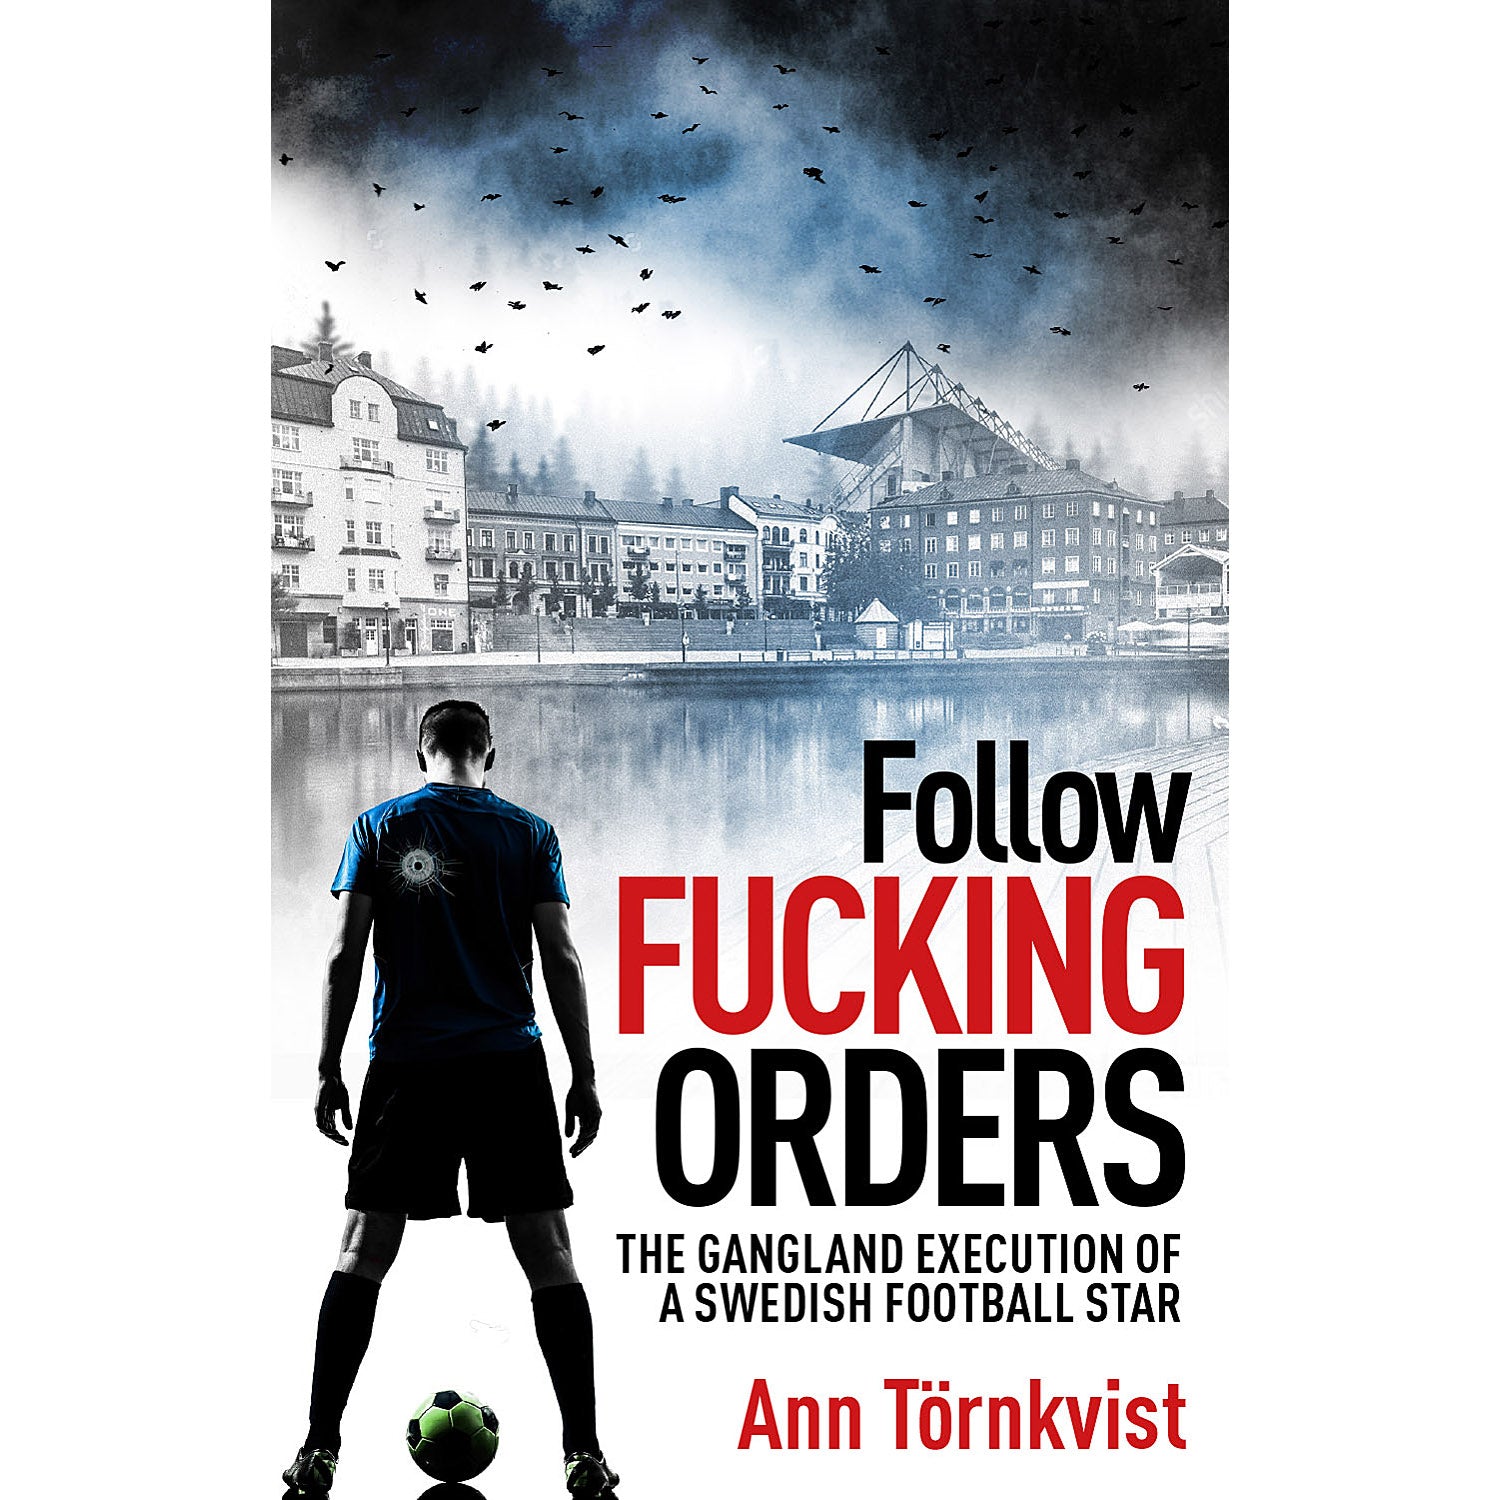 Follow F***ing Orders – The Gangland Execution of a Swedish Football Star